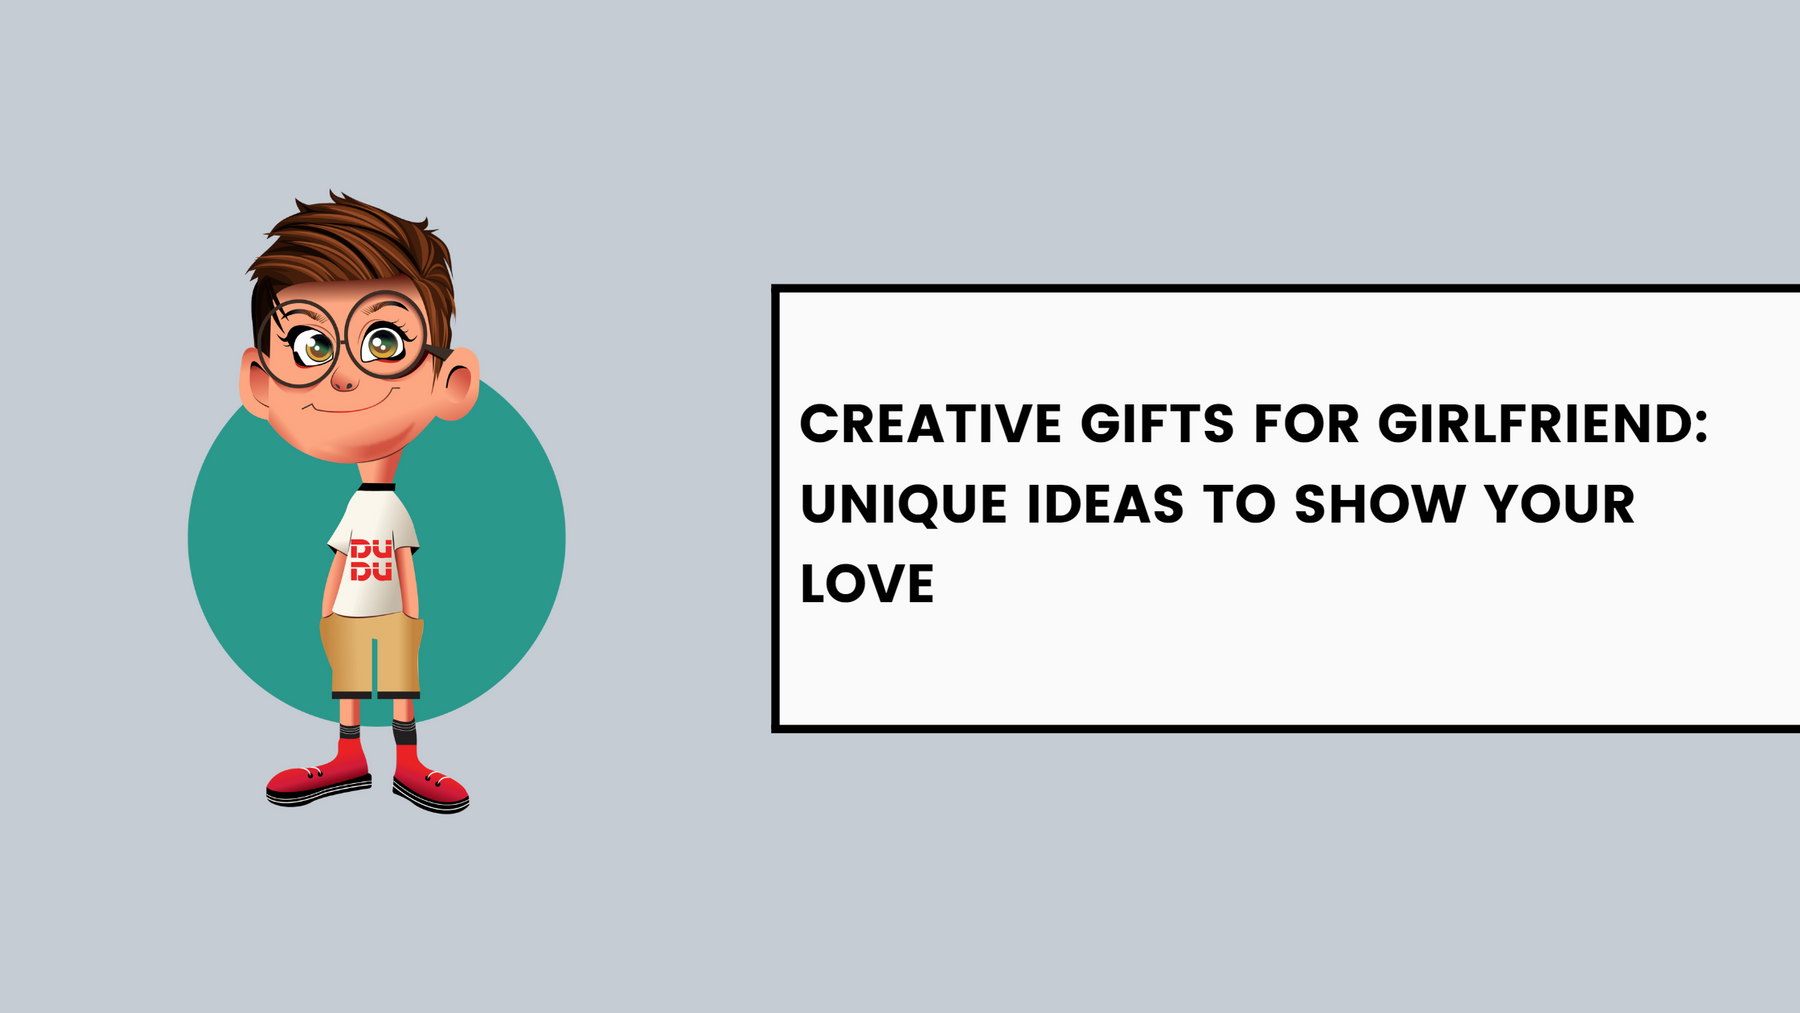 Creative Gifts for Girlfriend: Unique Ideas to Show Your Love